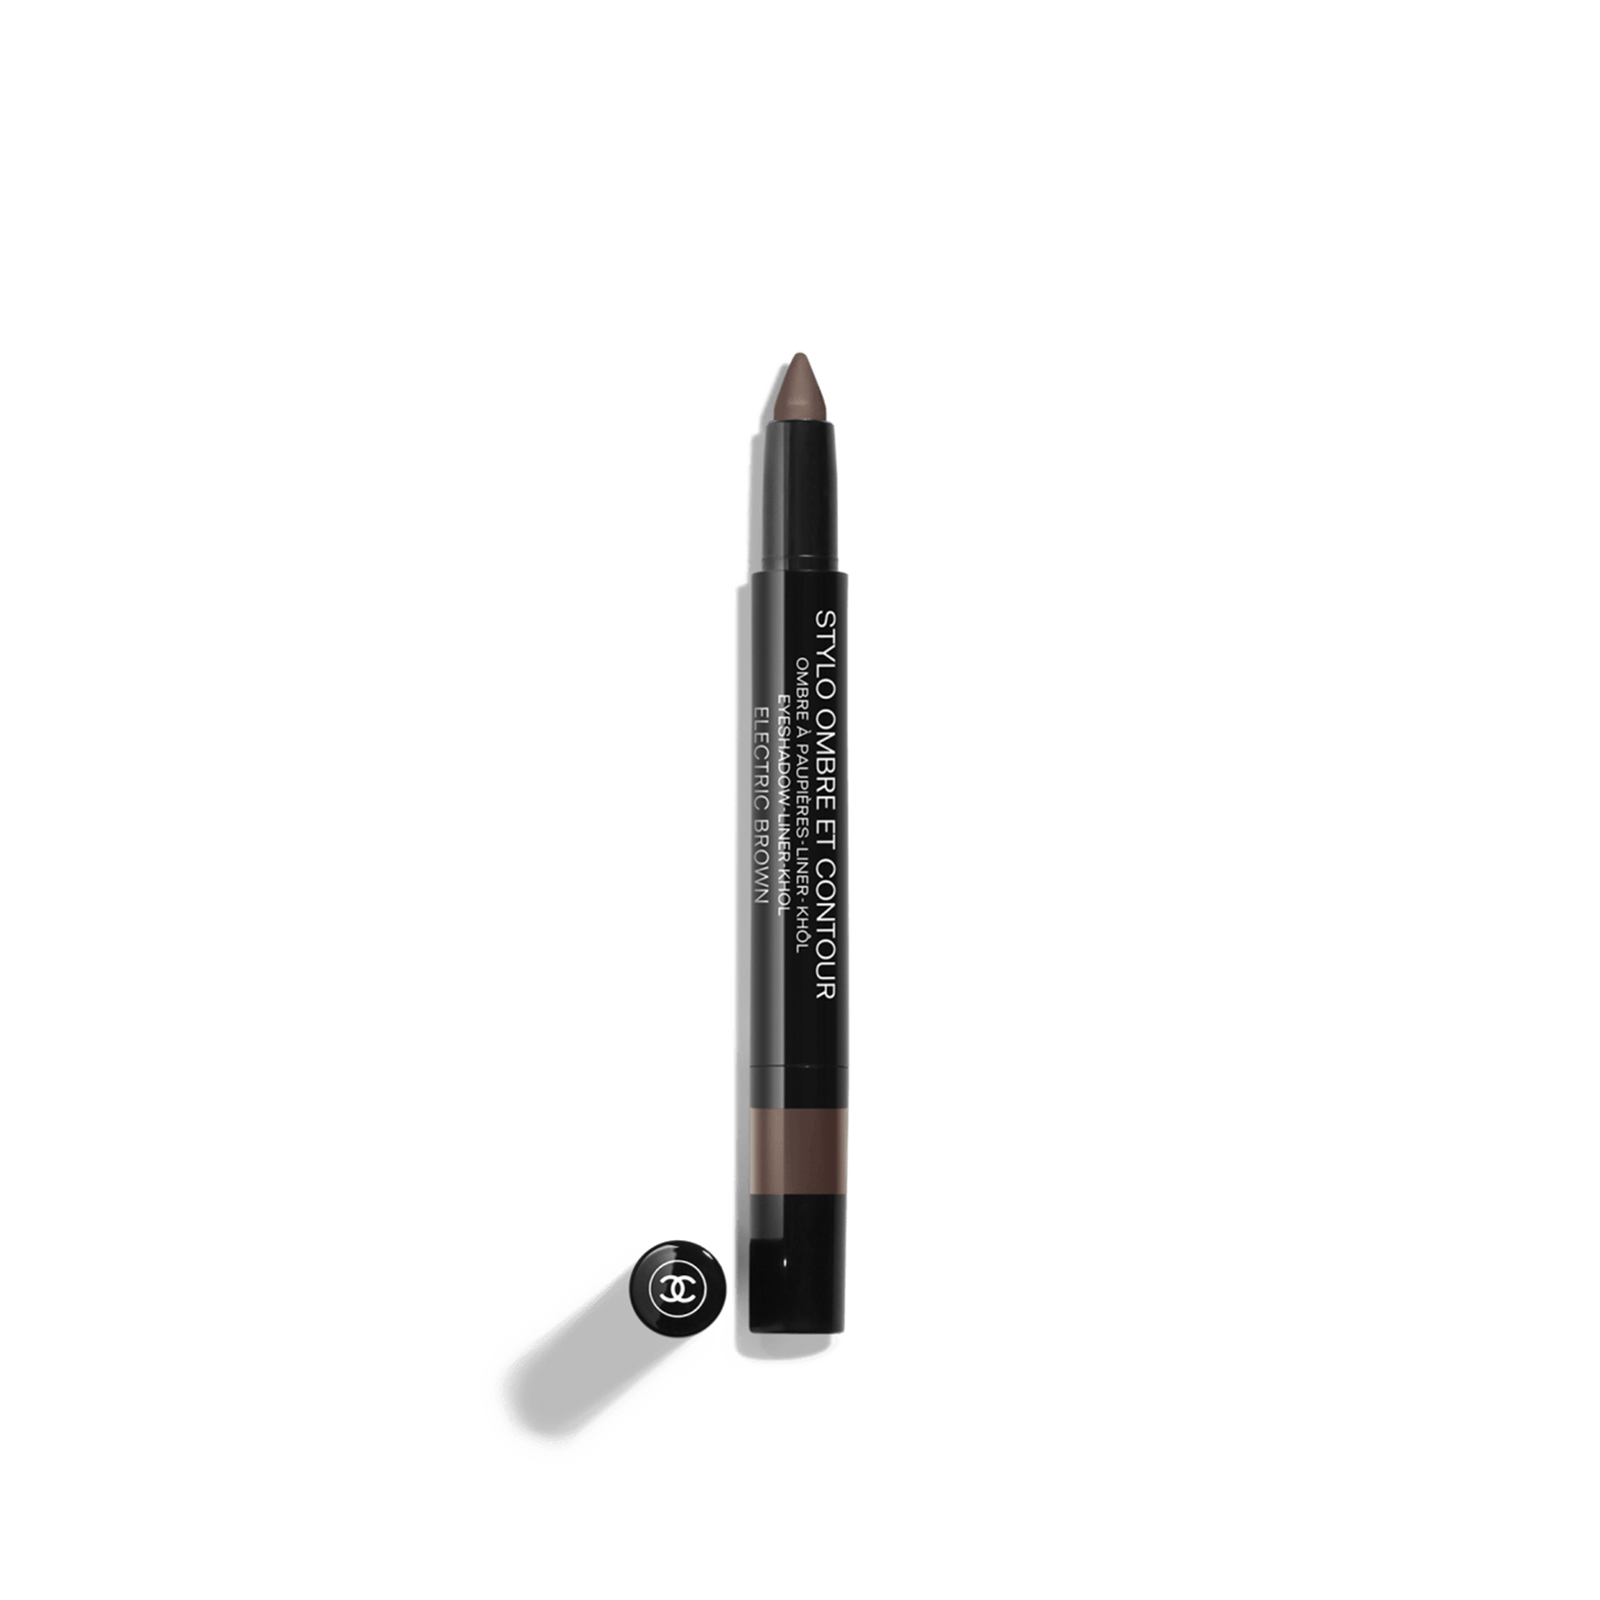 CHANEL Stylo Ombre Et Contour Eyeshadow Liner-Khol 04 Electric Brown 0.8g